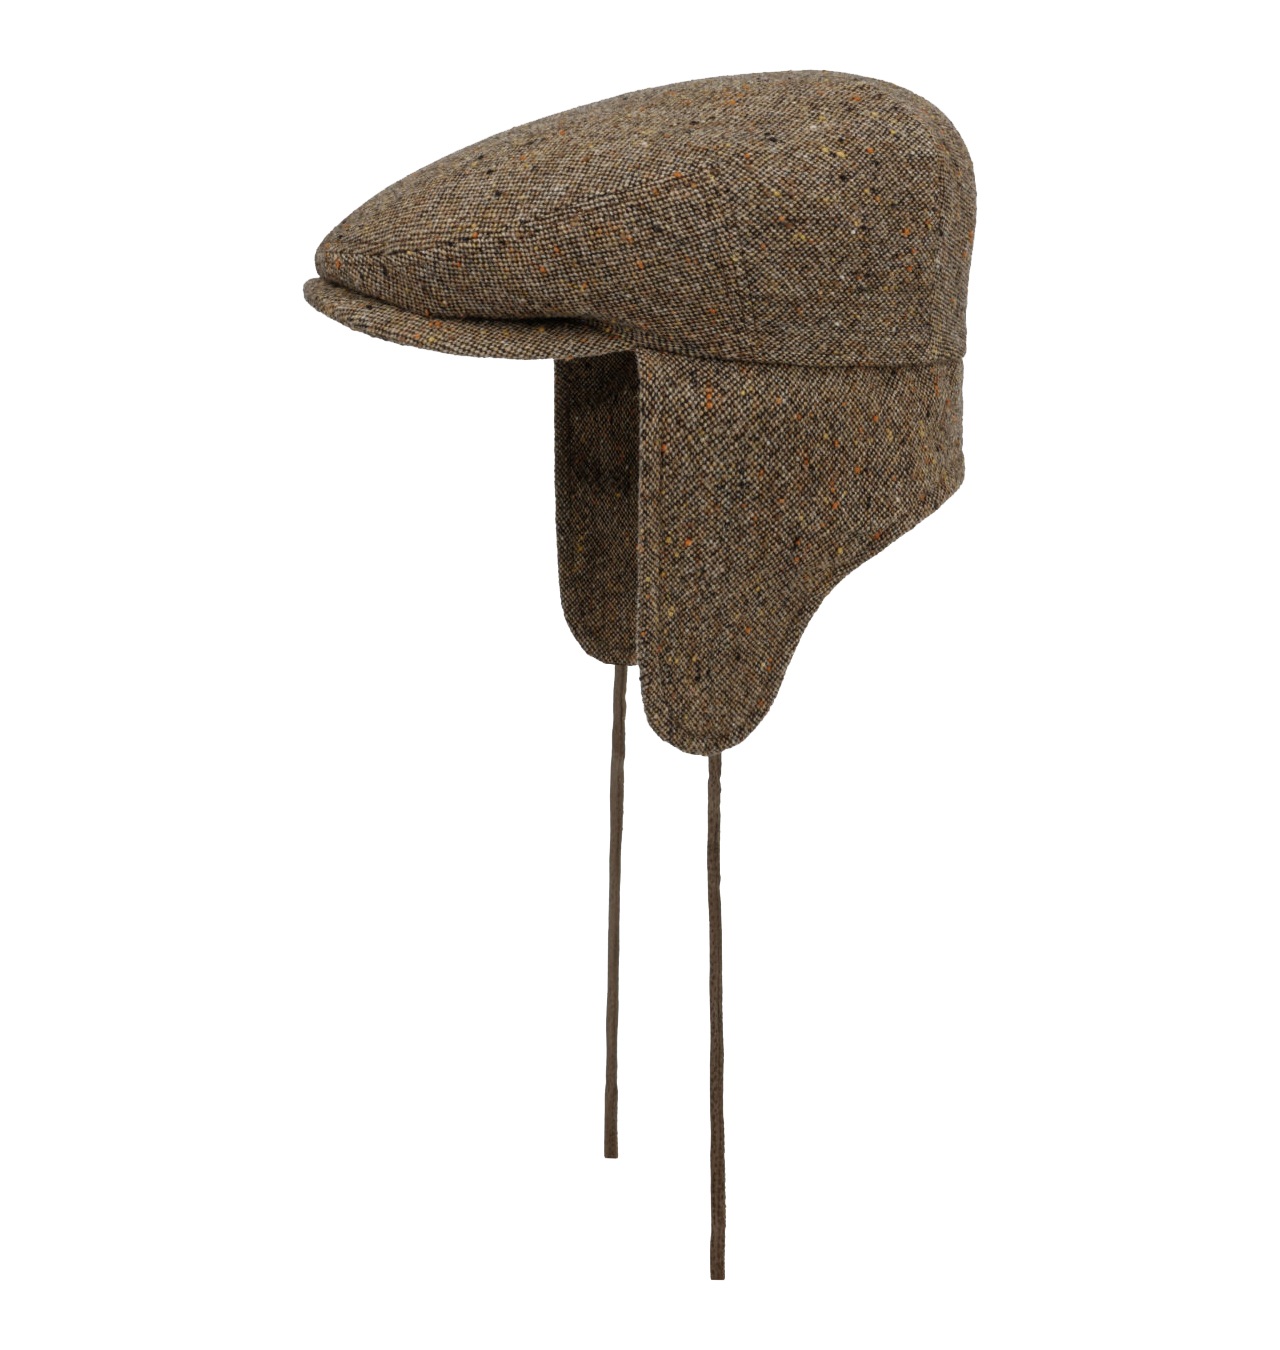 Stetson---Virgin-Wool-Driver-Cap-With-Ear-Flaps---Brown1